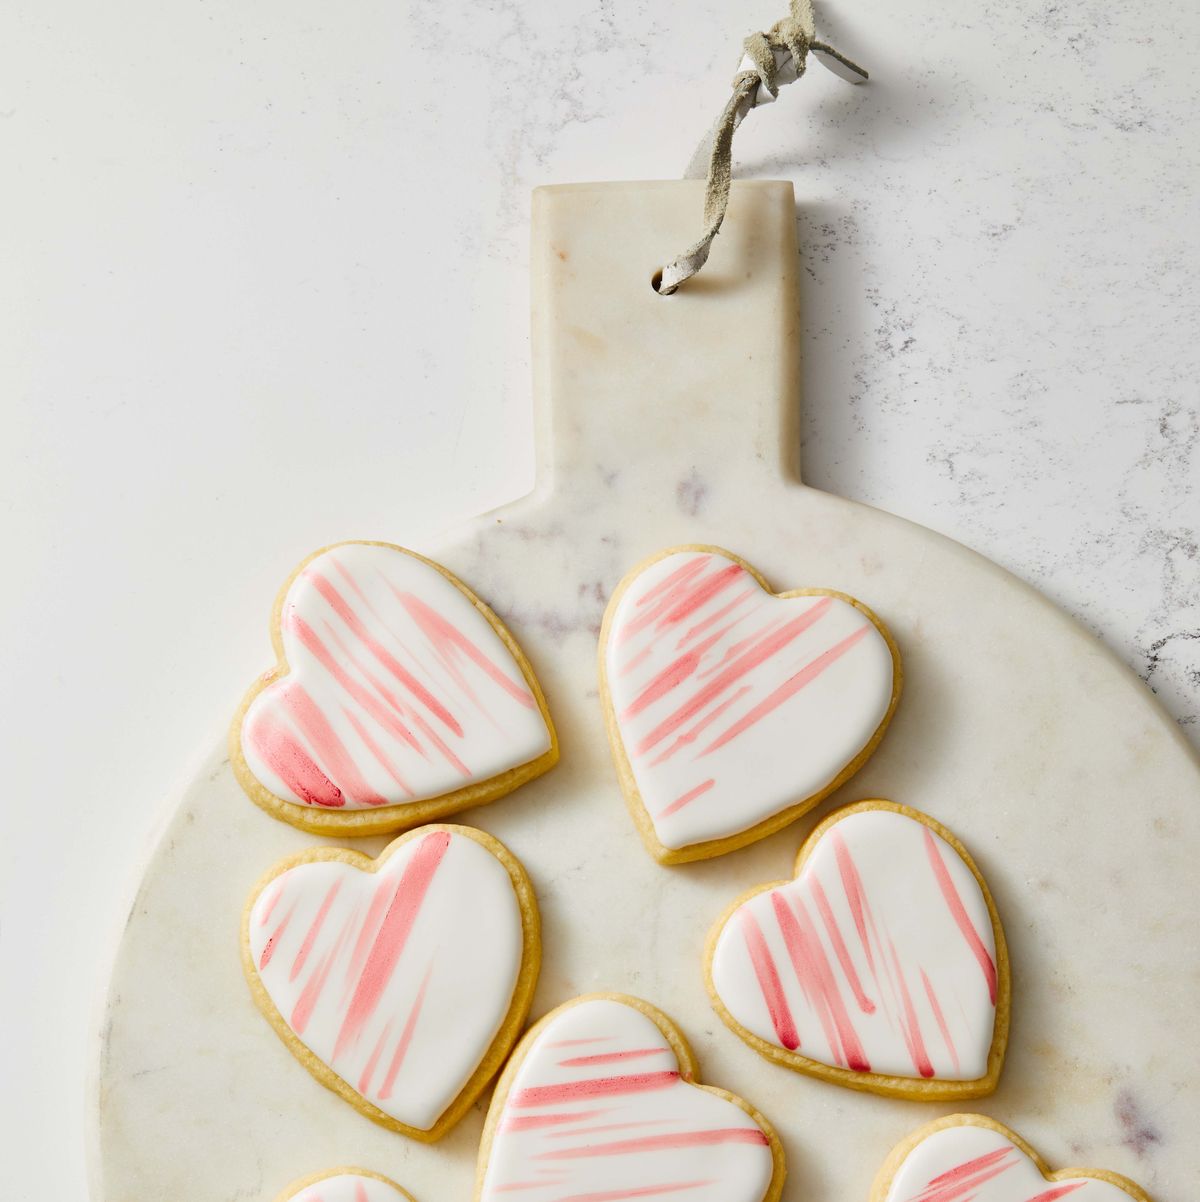 Best Heart-Shaped Cookies Recipe - How To Make Heart-Shaped Cookies